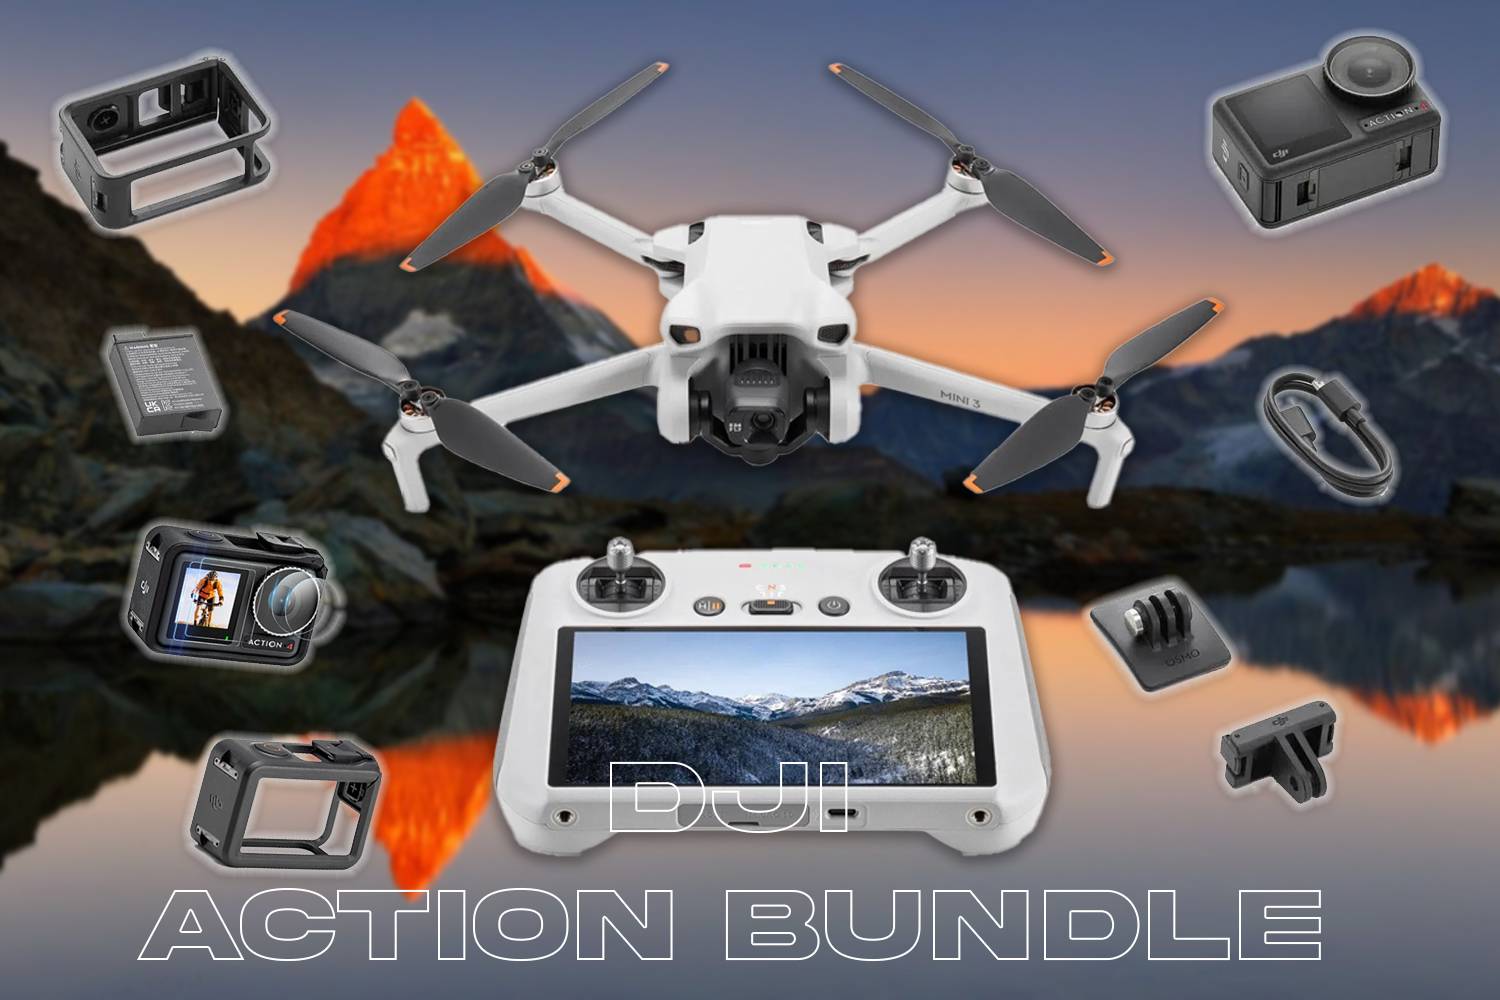 Win this DJi Action Bundle - Only 830 Entries